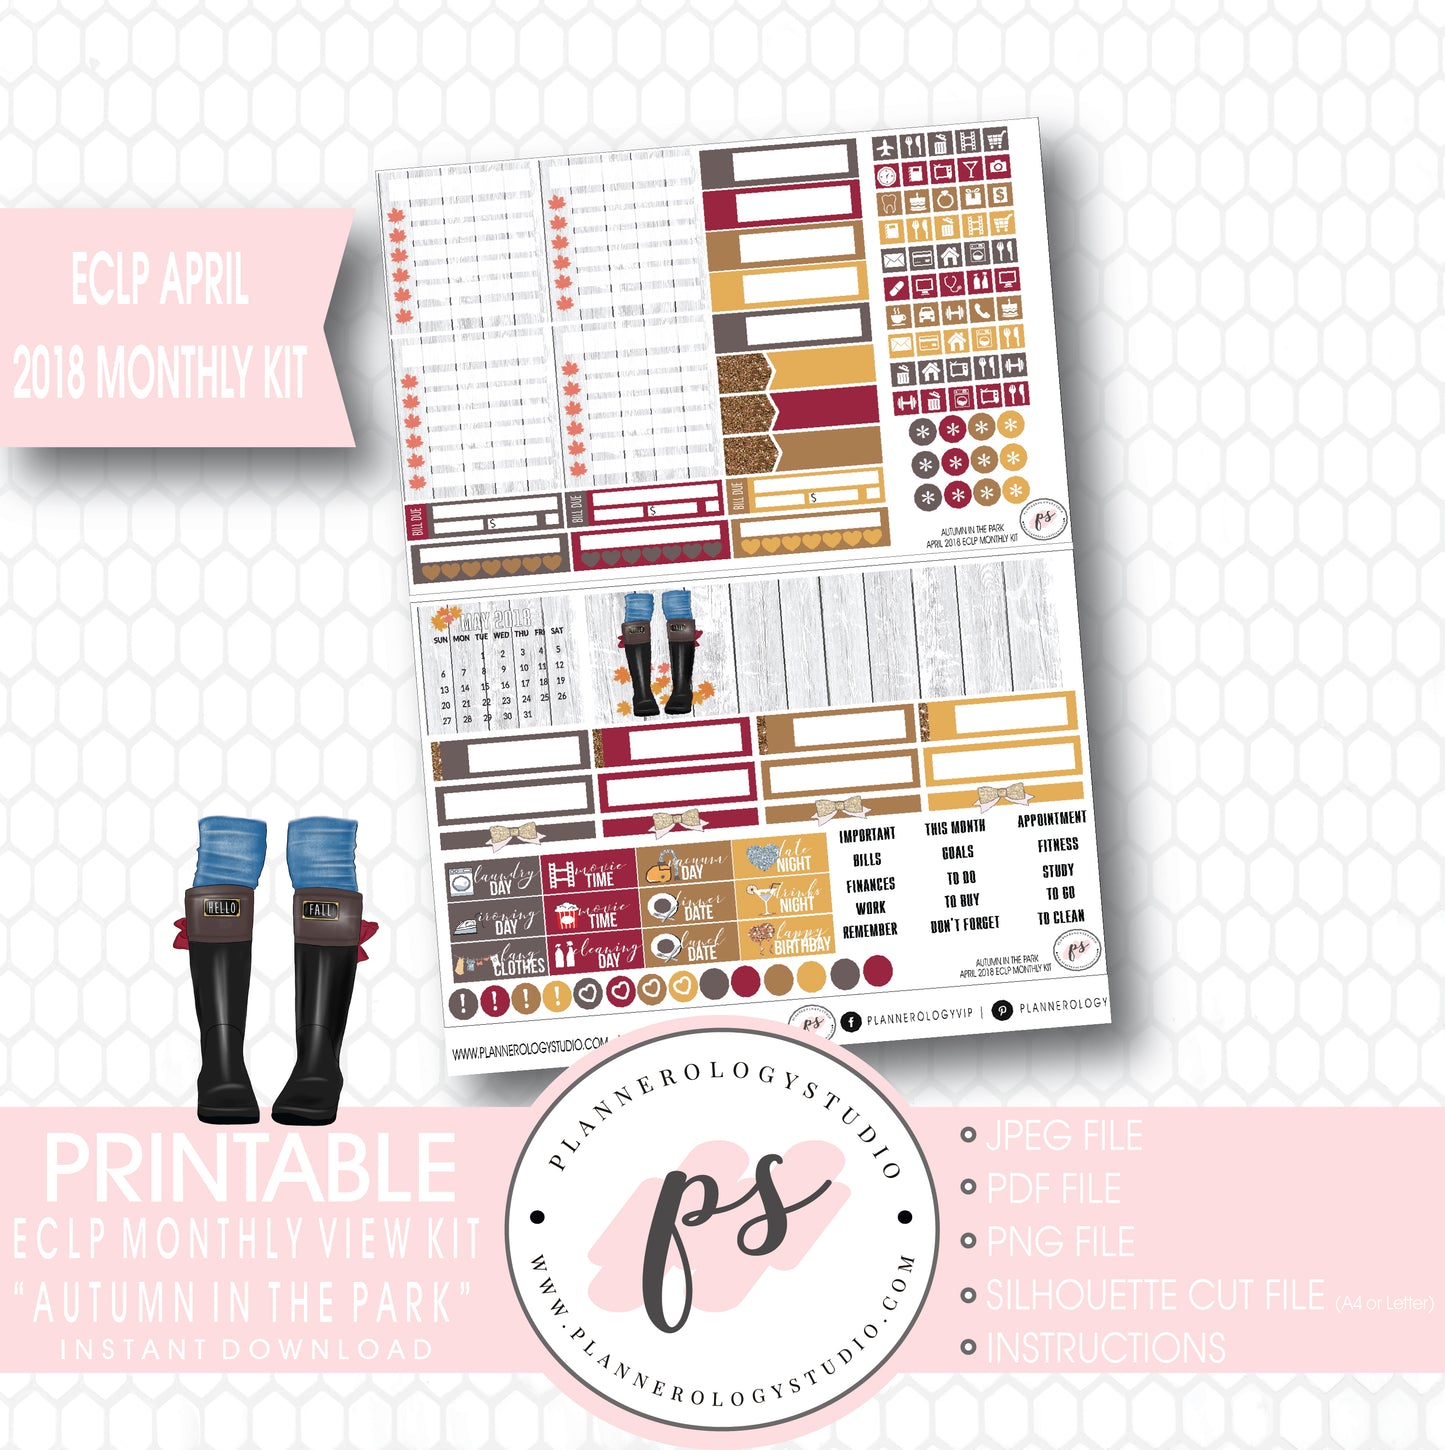 Autumn in the Park April 2018 Monthly View Kit Digital Printable Planner Stickers (for use with Erin Condren) - Plannerologystudio